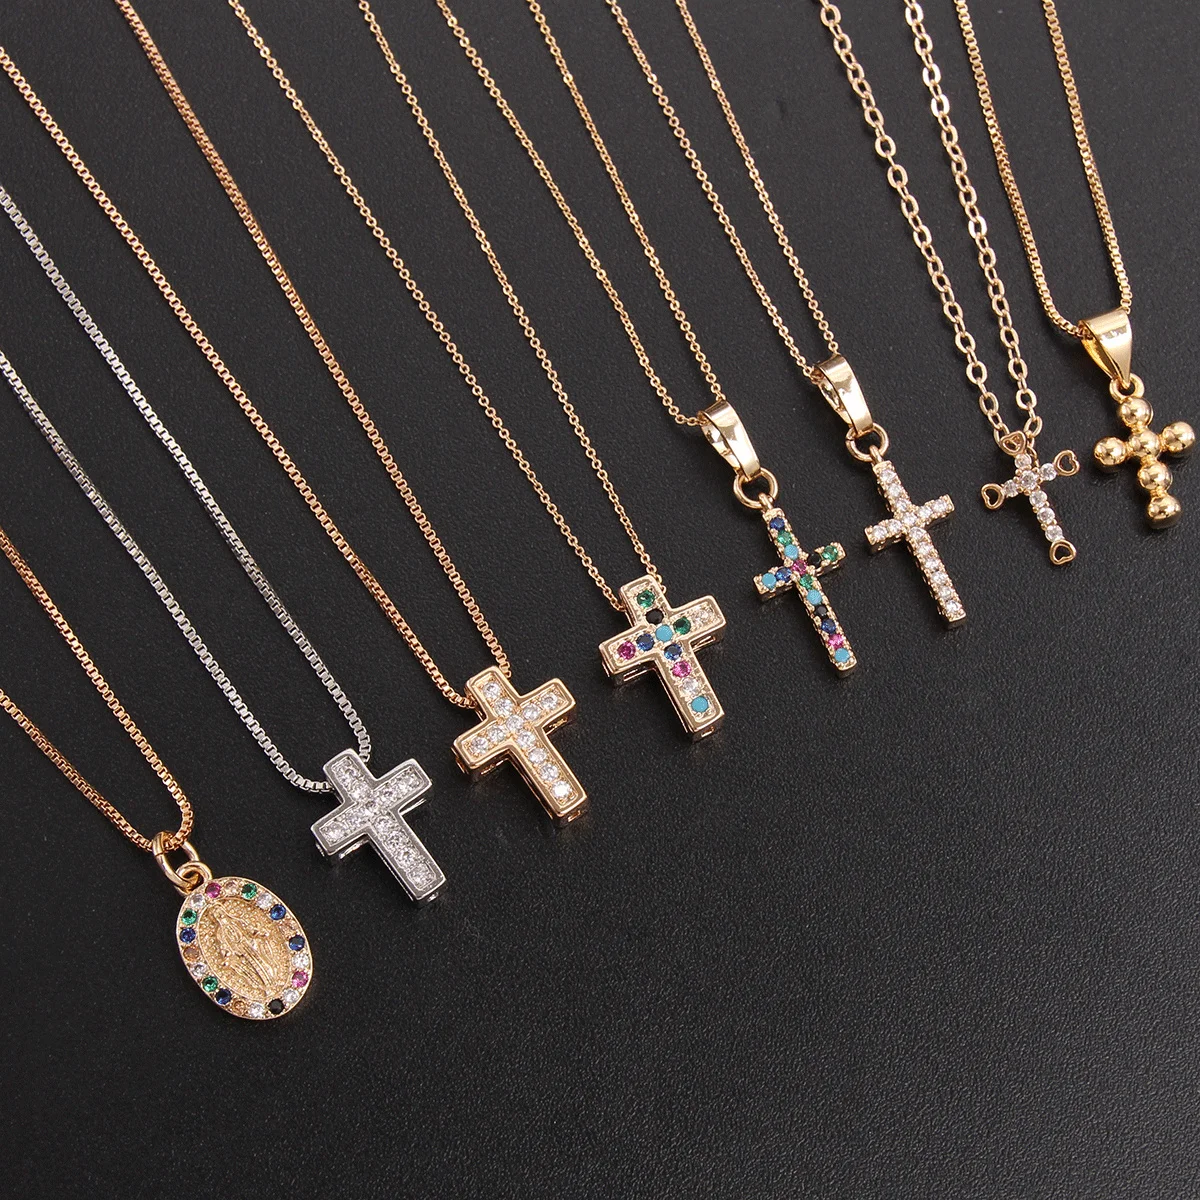 

SUNSLL Simple Gold Color Necklace Little Jesus Christ Cross Pendant Necklaces Chain Charm Choker For Women Wish Jewelry